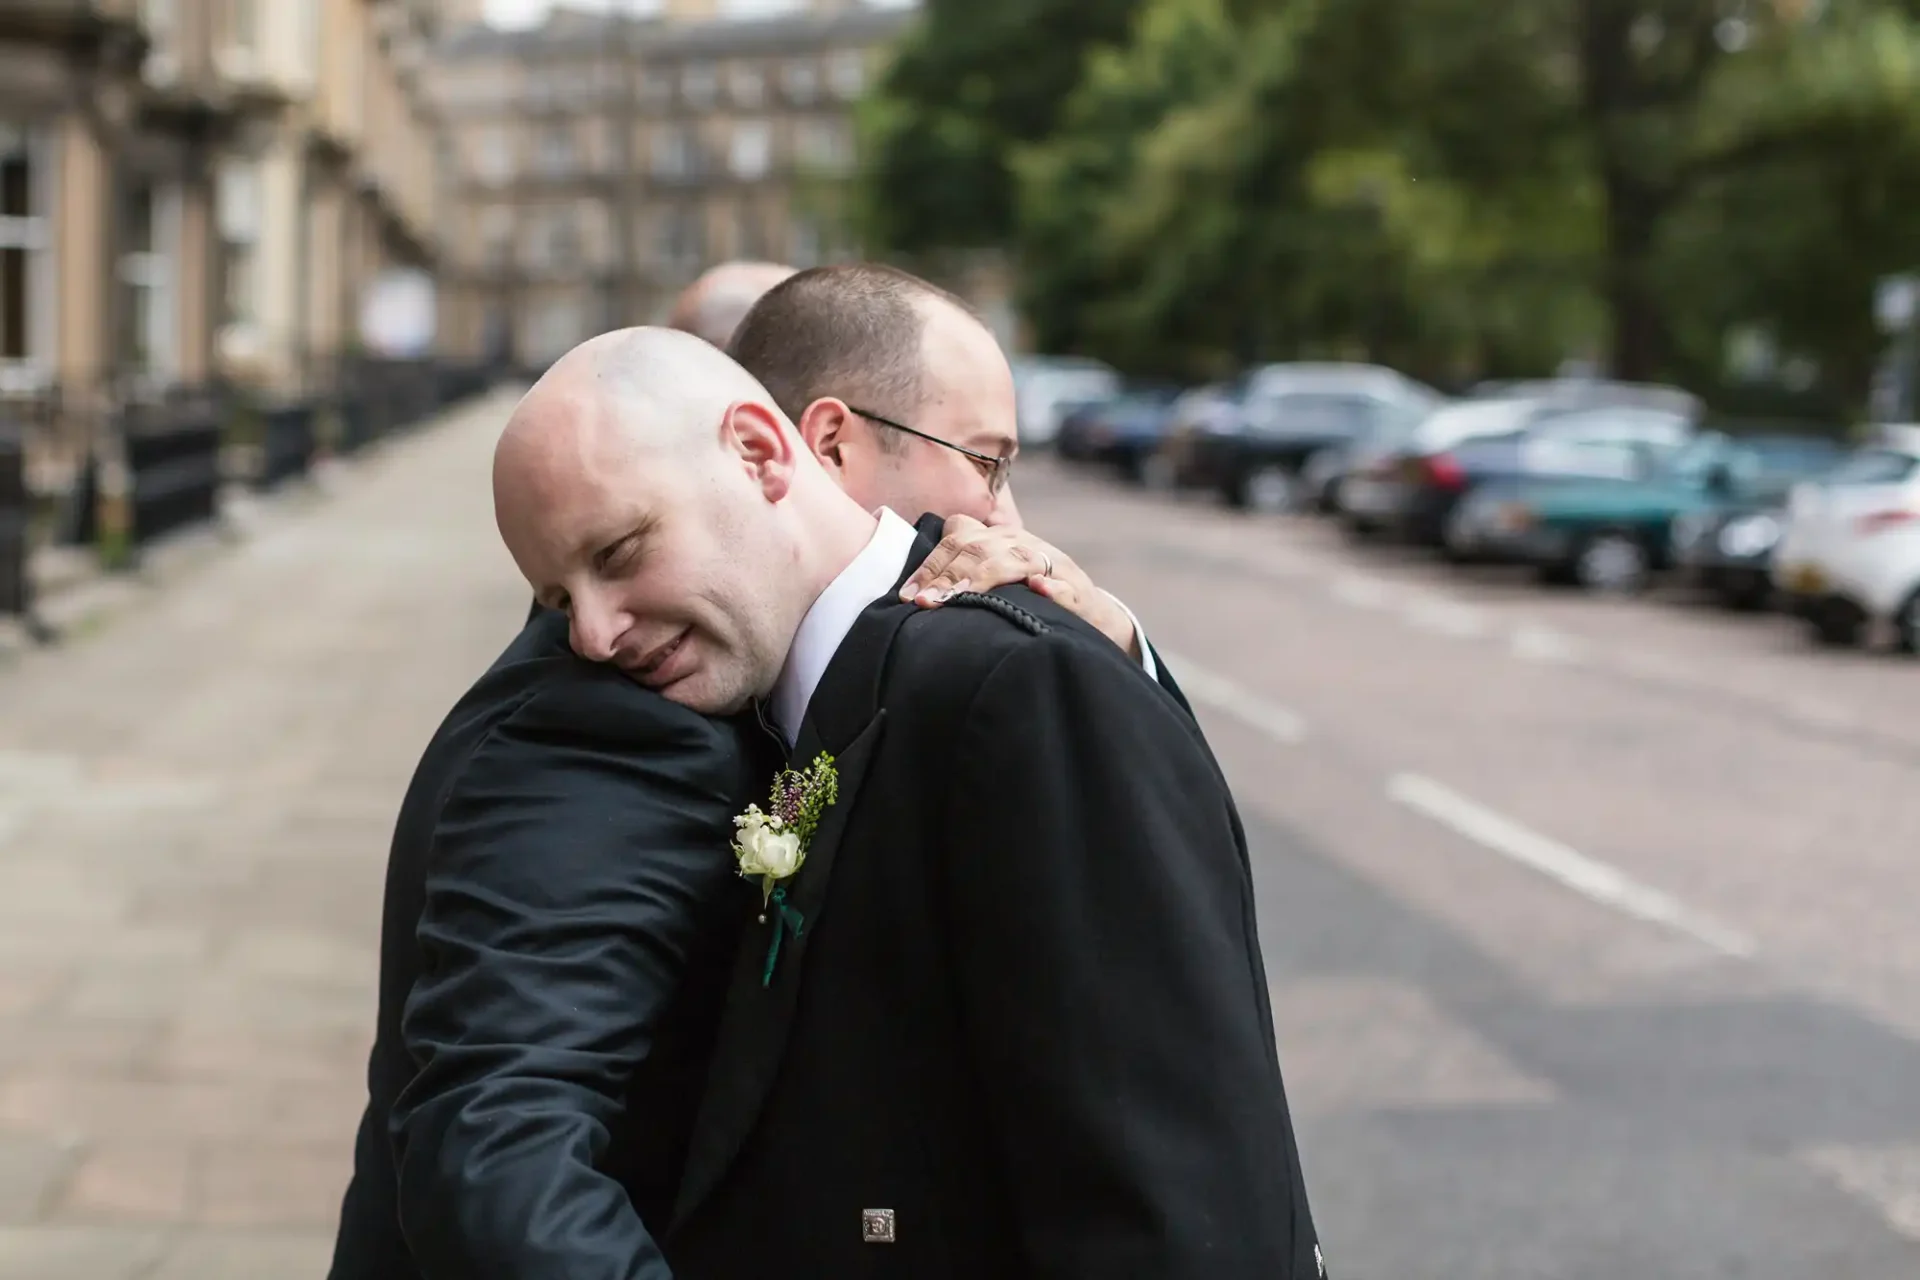 Two men in suits hugging on a street, displaying affection and emotion, with cars and buildings in the background.